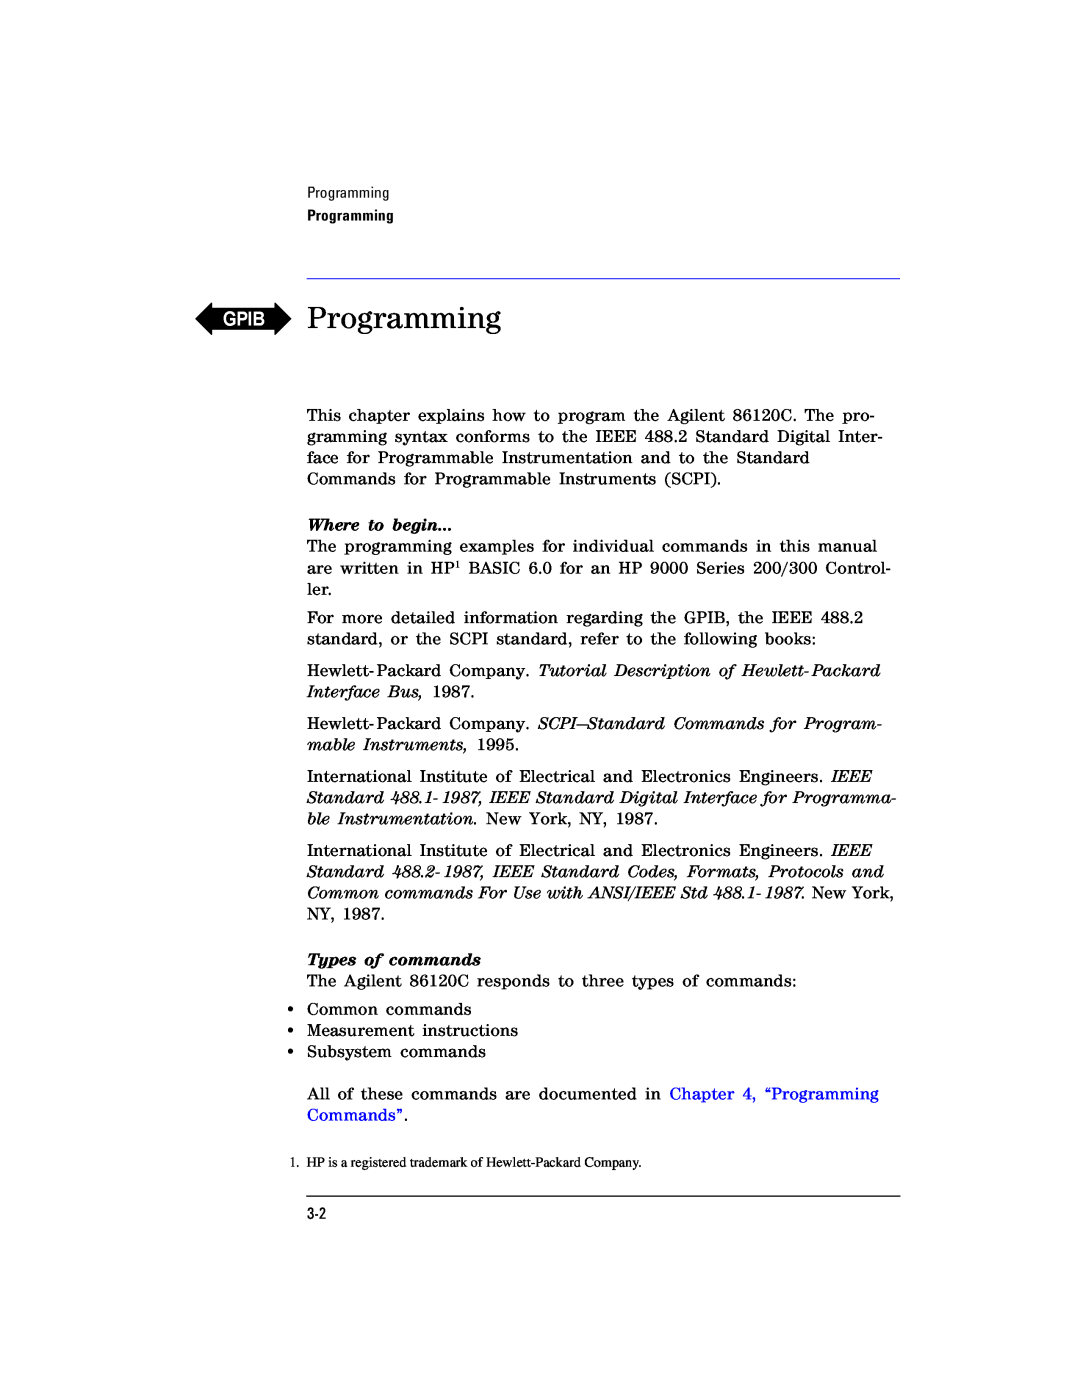 Agilent Technologies Agilent 86120C manual Programming, Where to begin…, Types of commands 